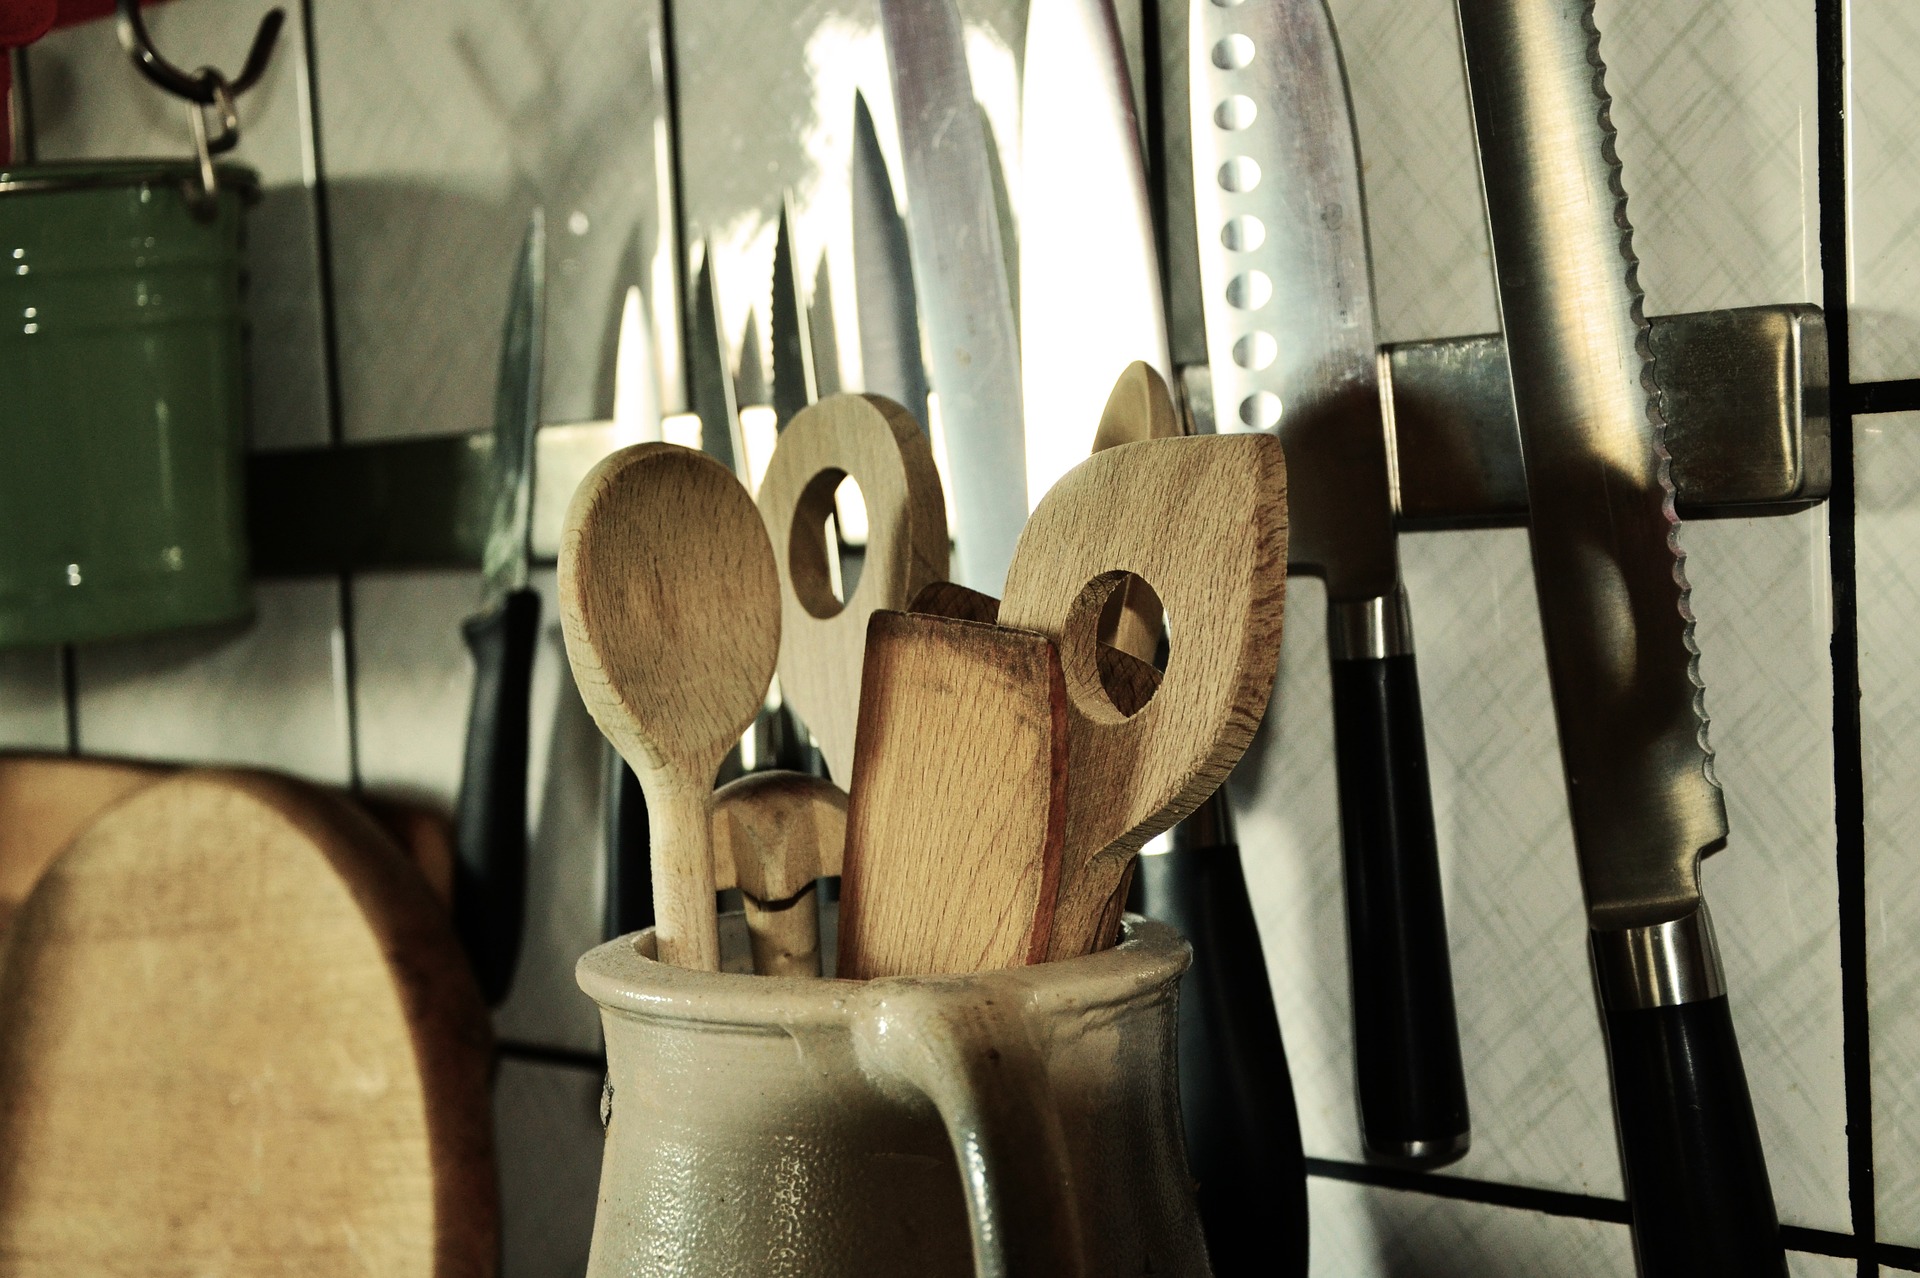 Kitchen utensils, including a canister with wooden spoons and sharp kitchen knives